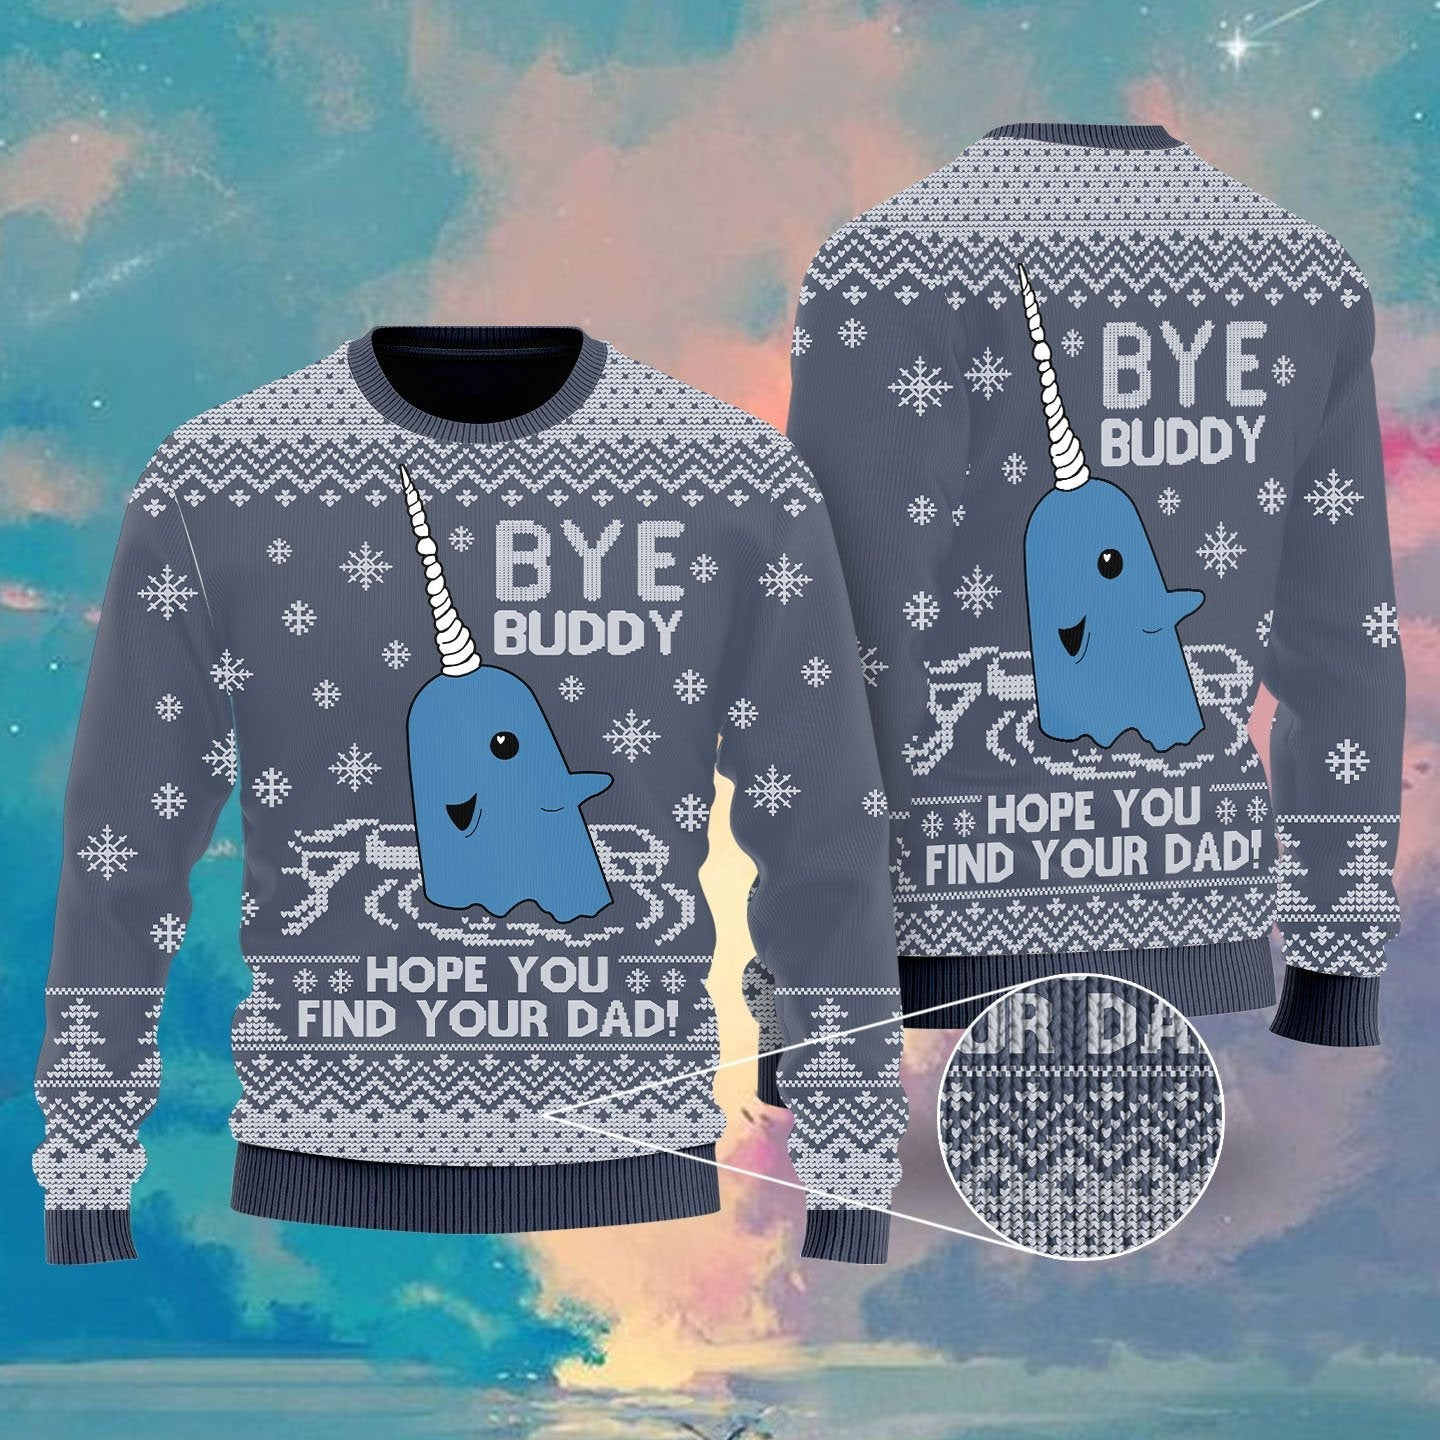 Bye Buddy Hope You Find Your Dad Ugly Christmas Sweater Ugly Sweater For Men Women, Holiday Sweater